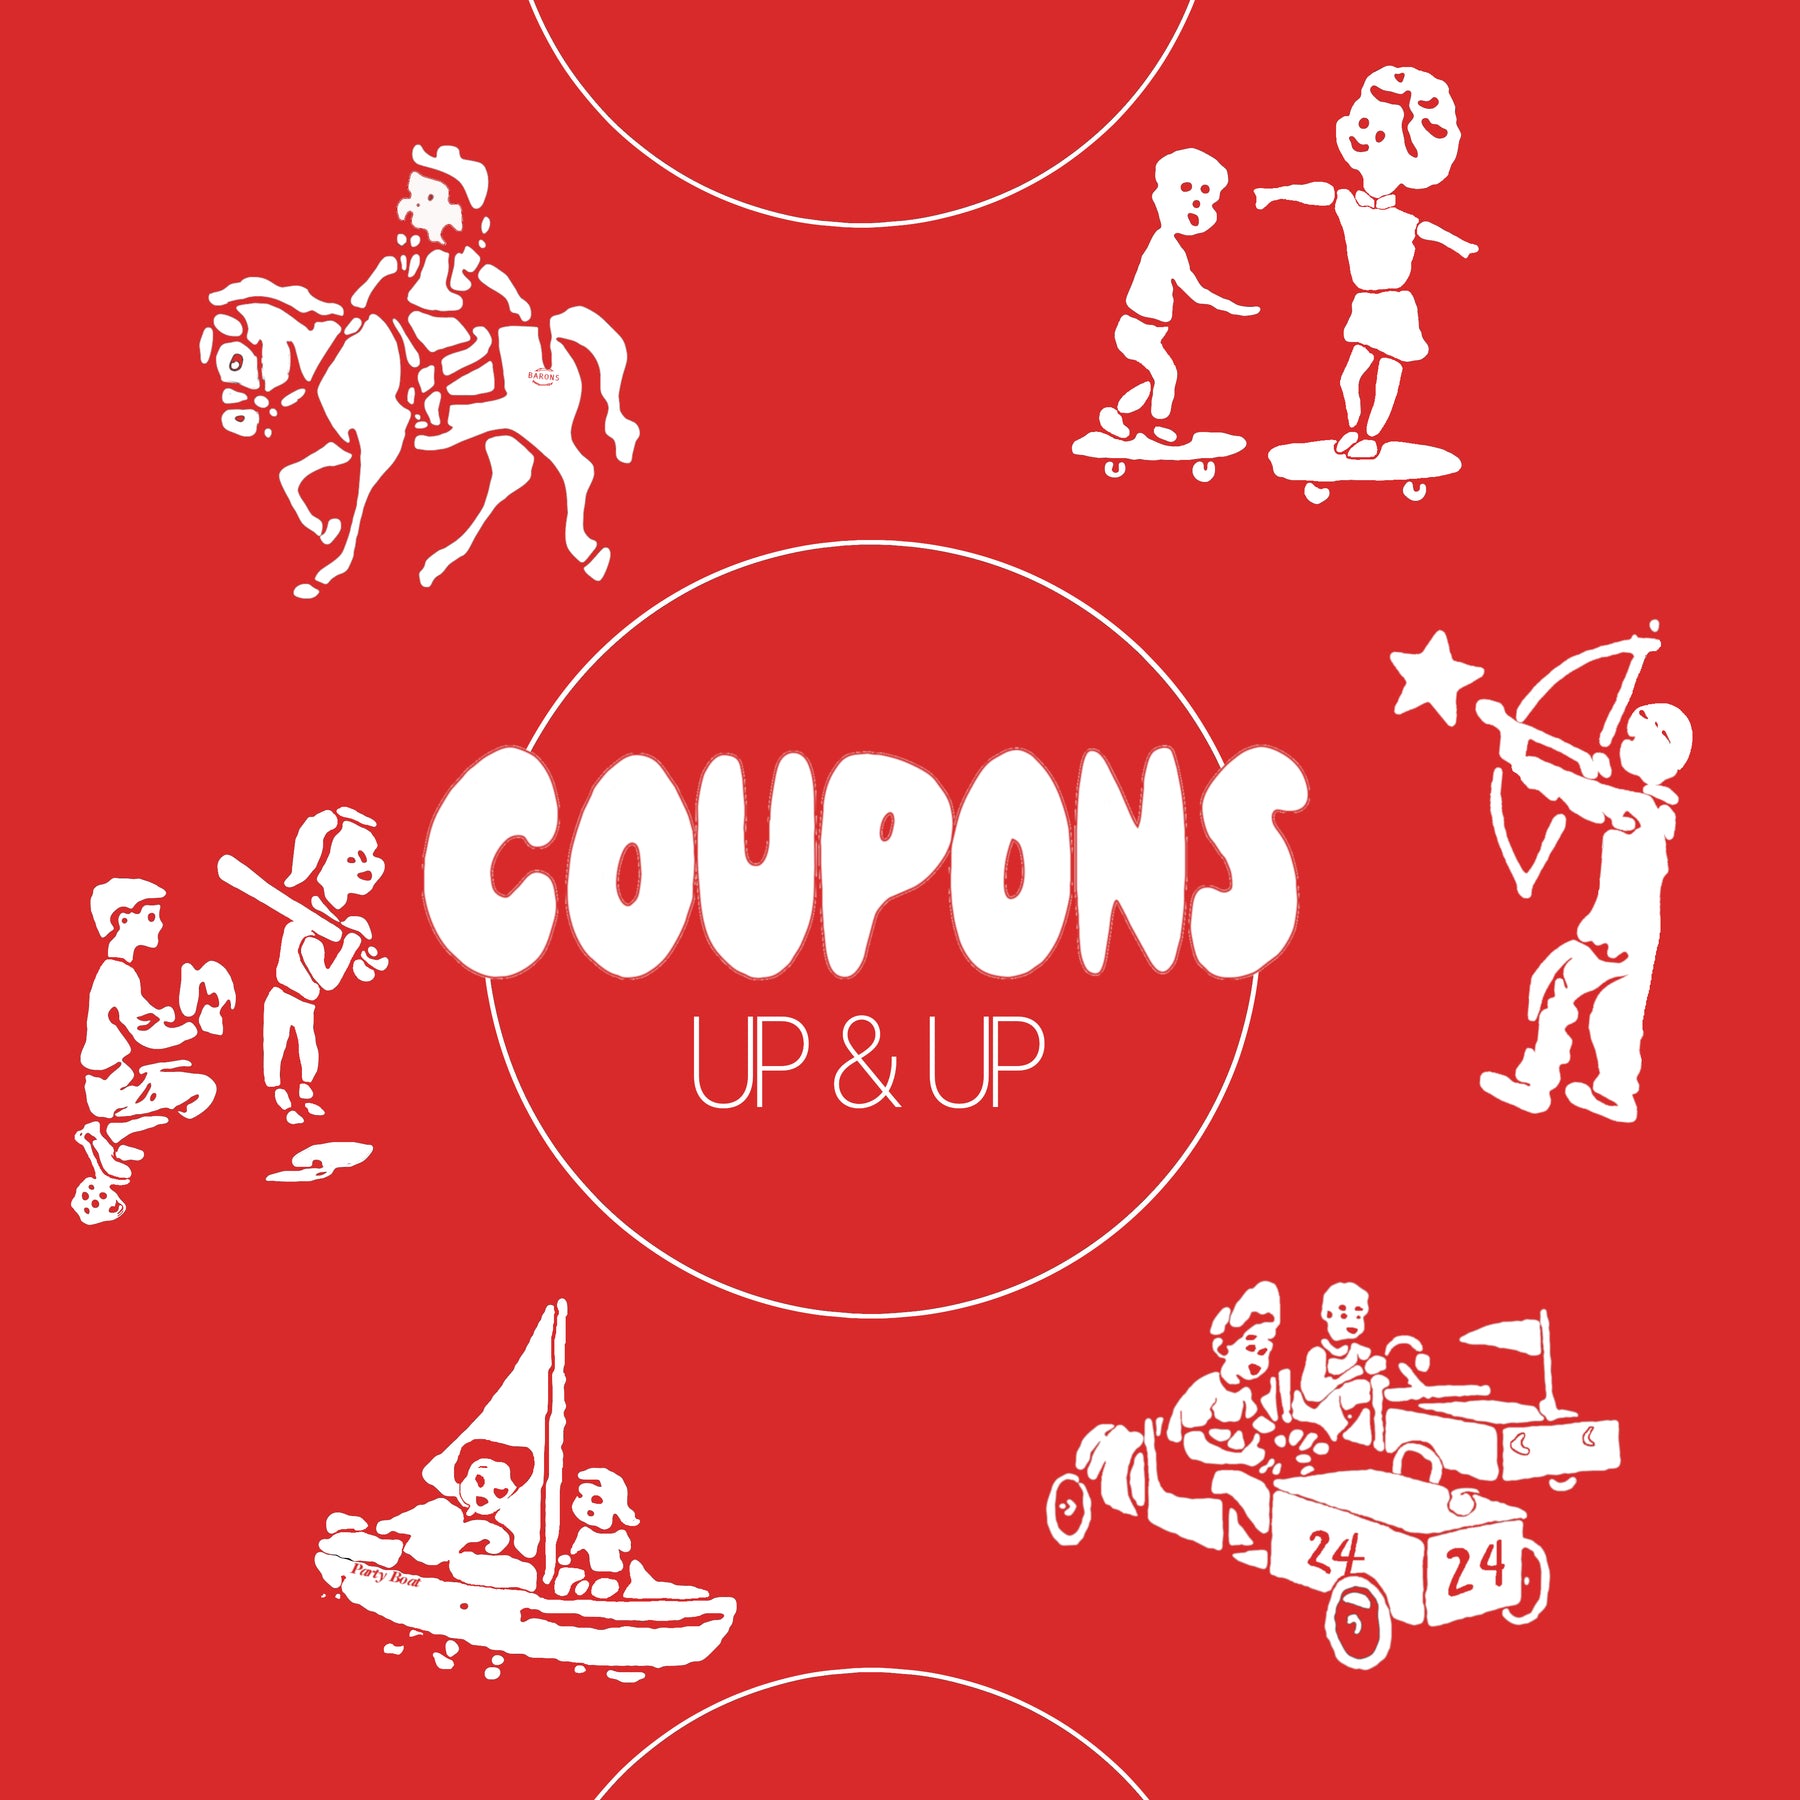 Coupons - Up & Up